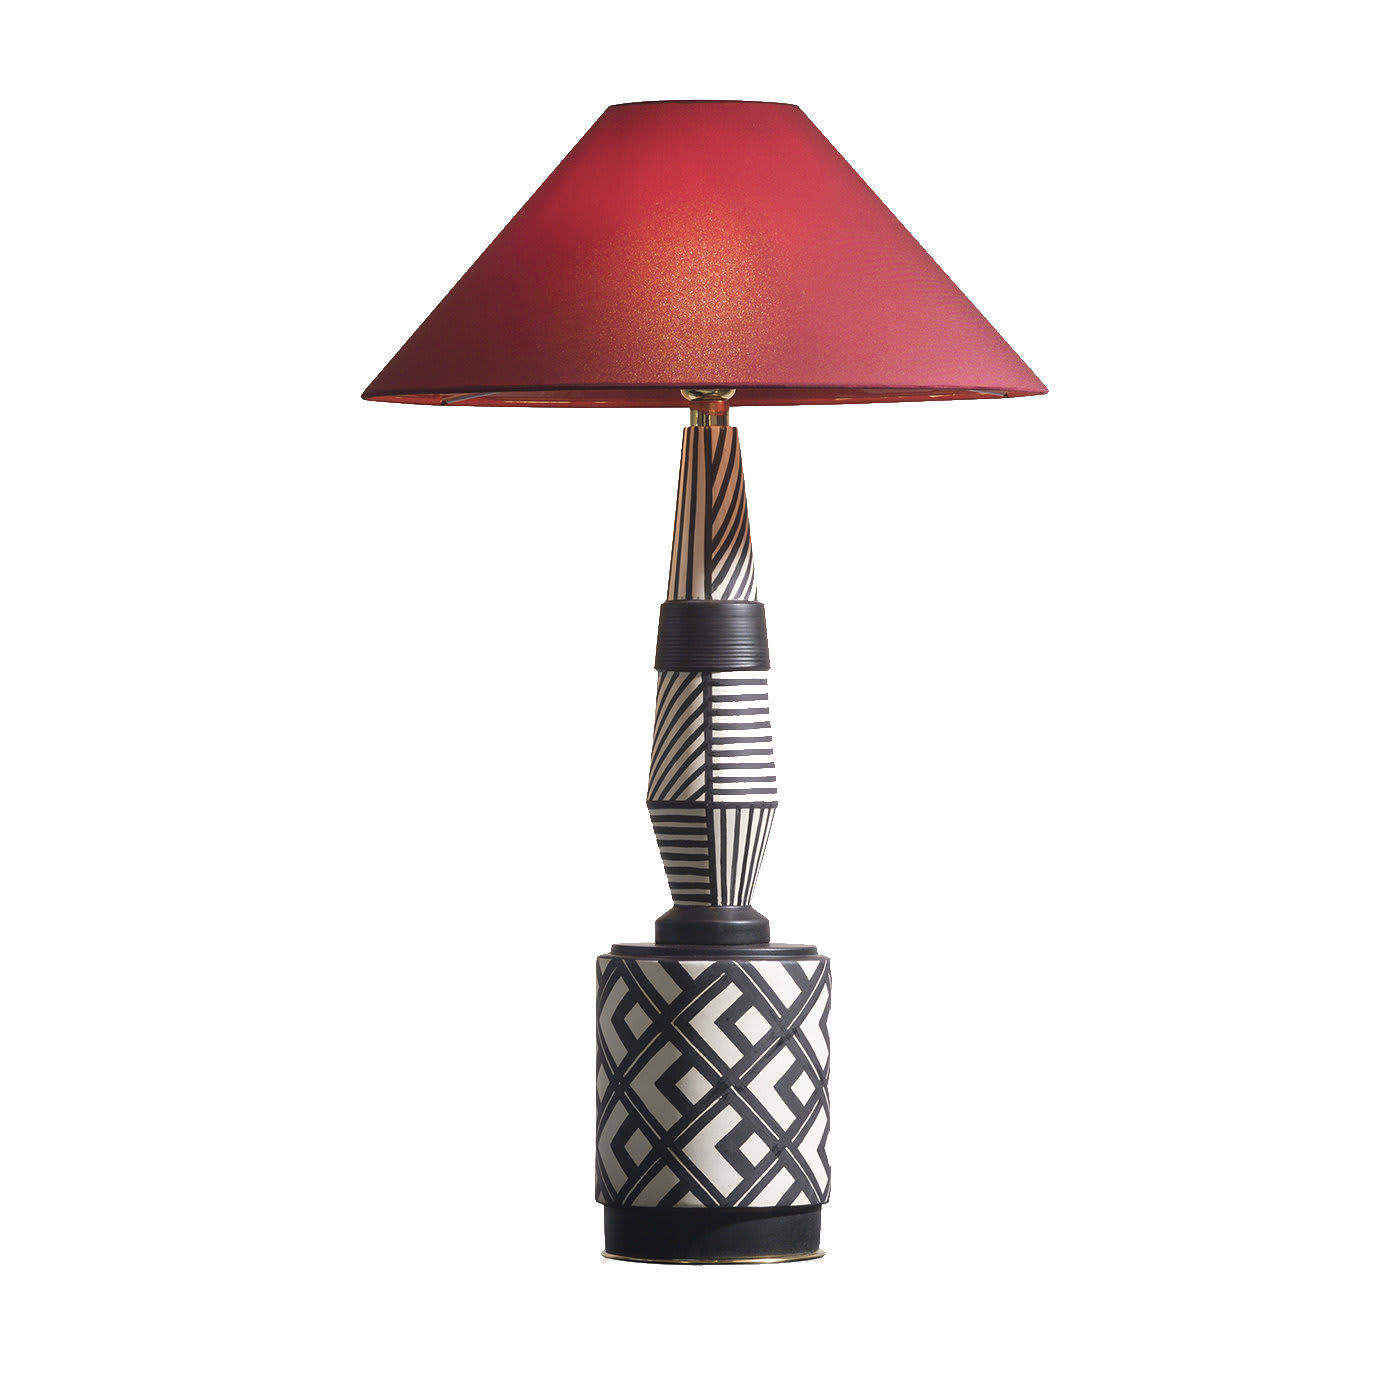 CL2074 Table Lamp - Sigma L2